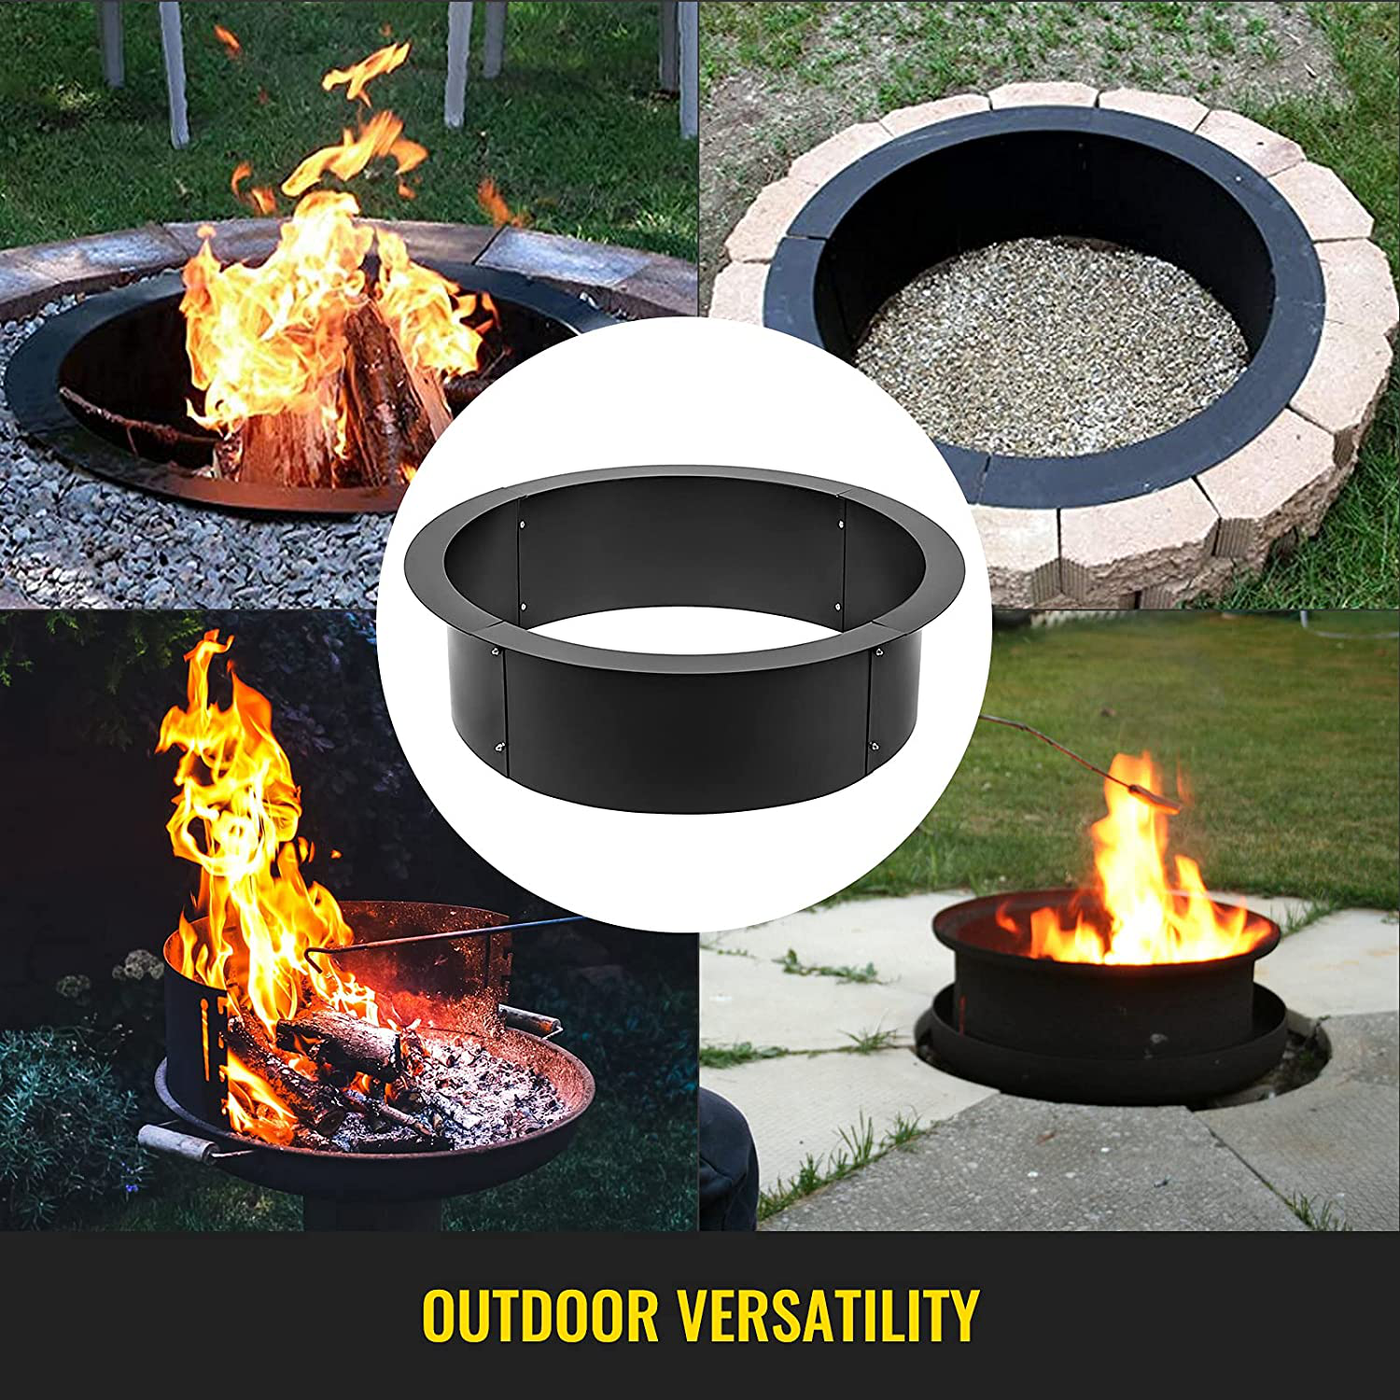 VBENLEM Fire Pit Ring 45-Inch Outer/39-Inch Inner Diameter, 3.0mm Thick Heavy Duty Solid Steel, Fire Pit Liner DIY Campfire Ring Above or In-Ground for Outdoor